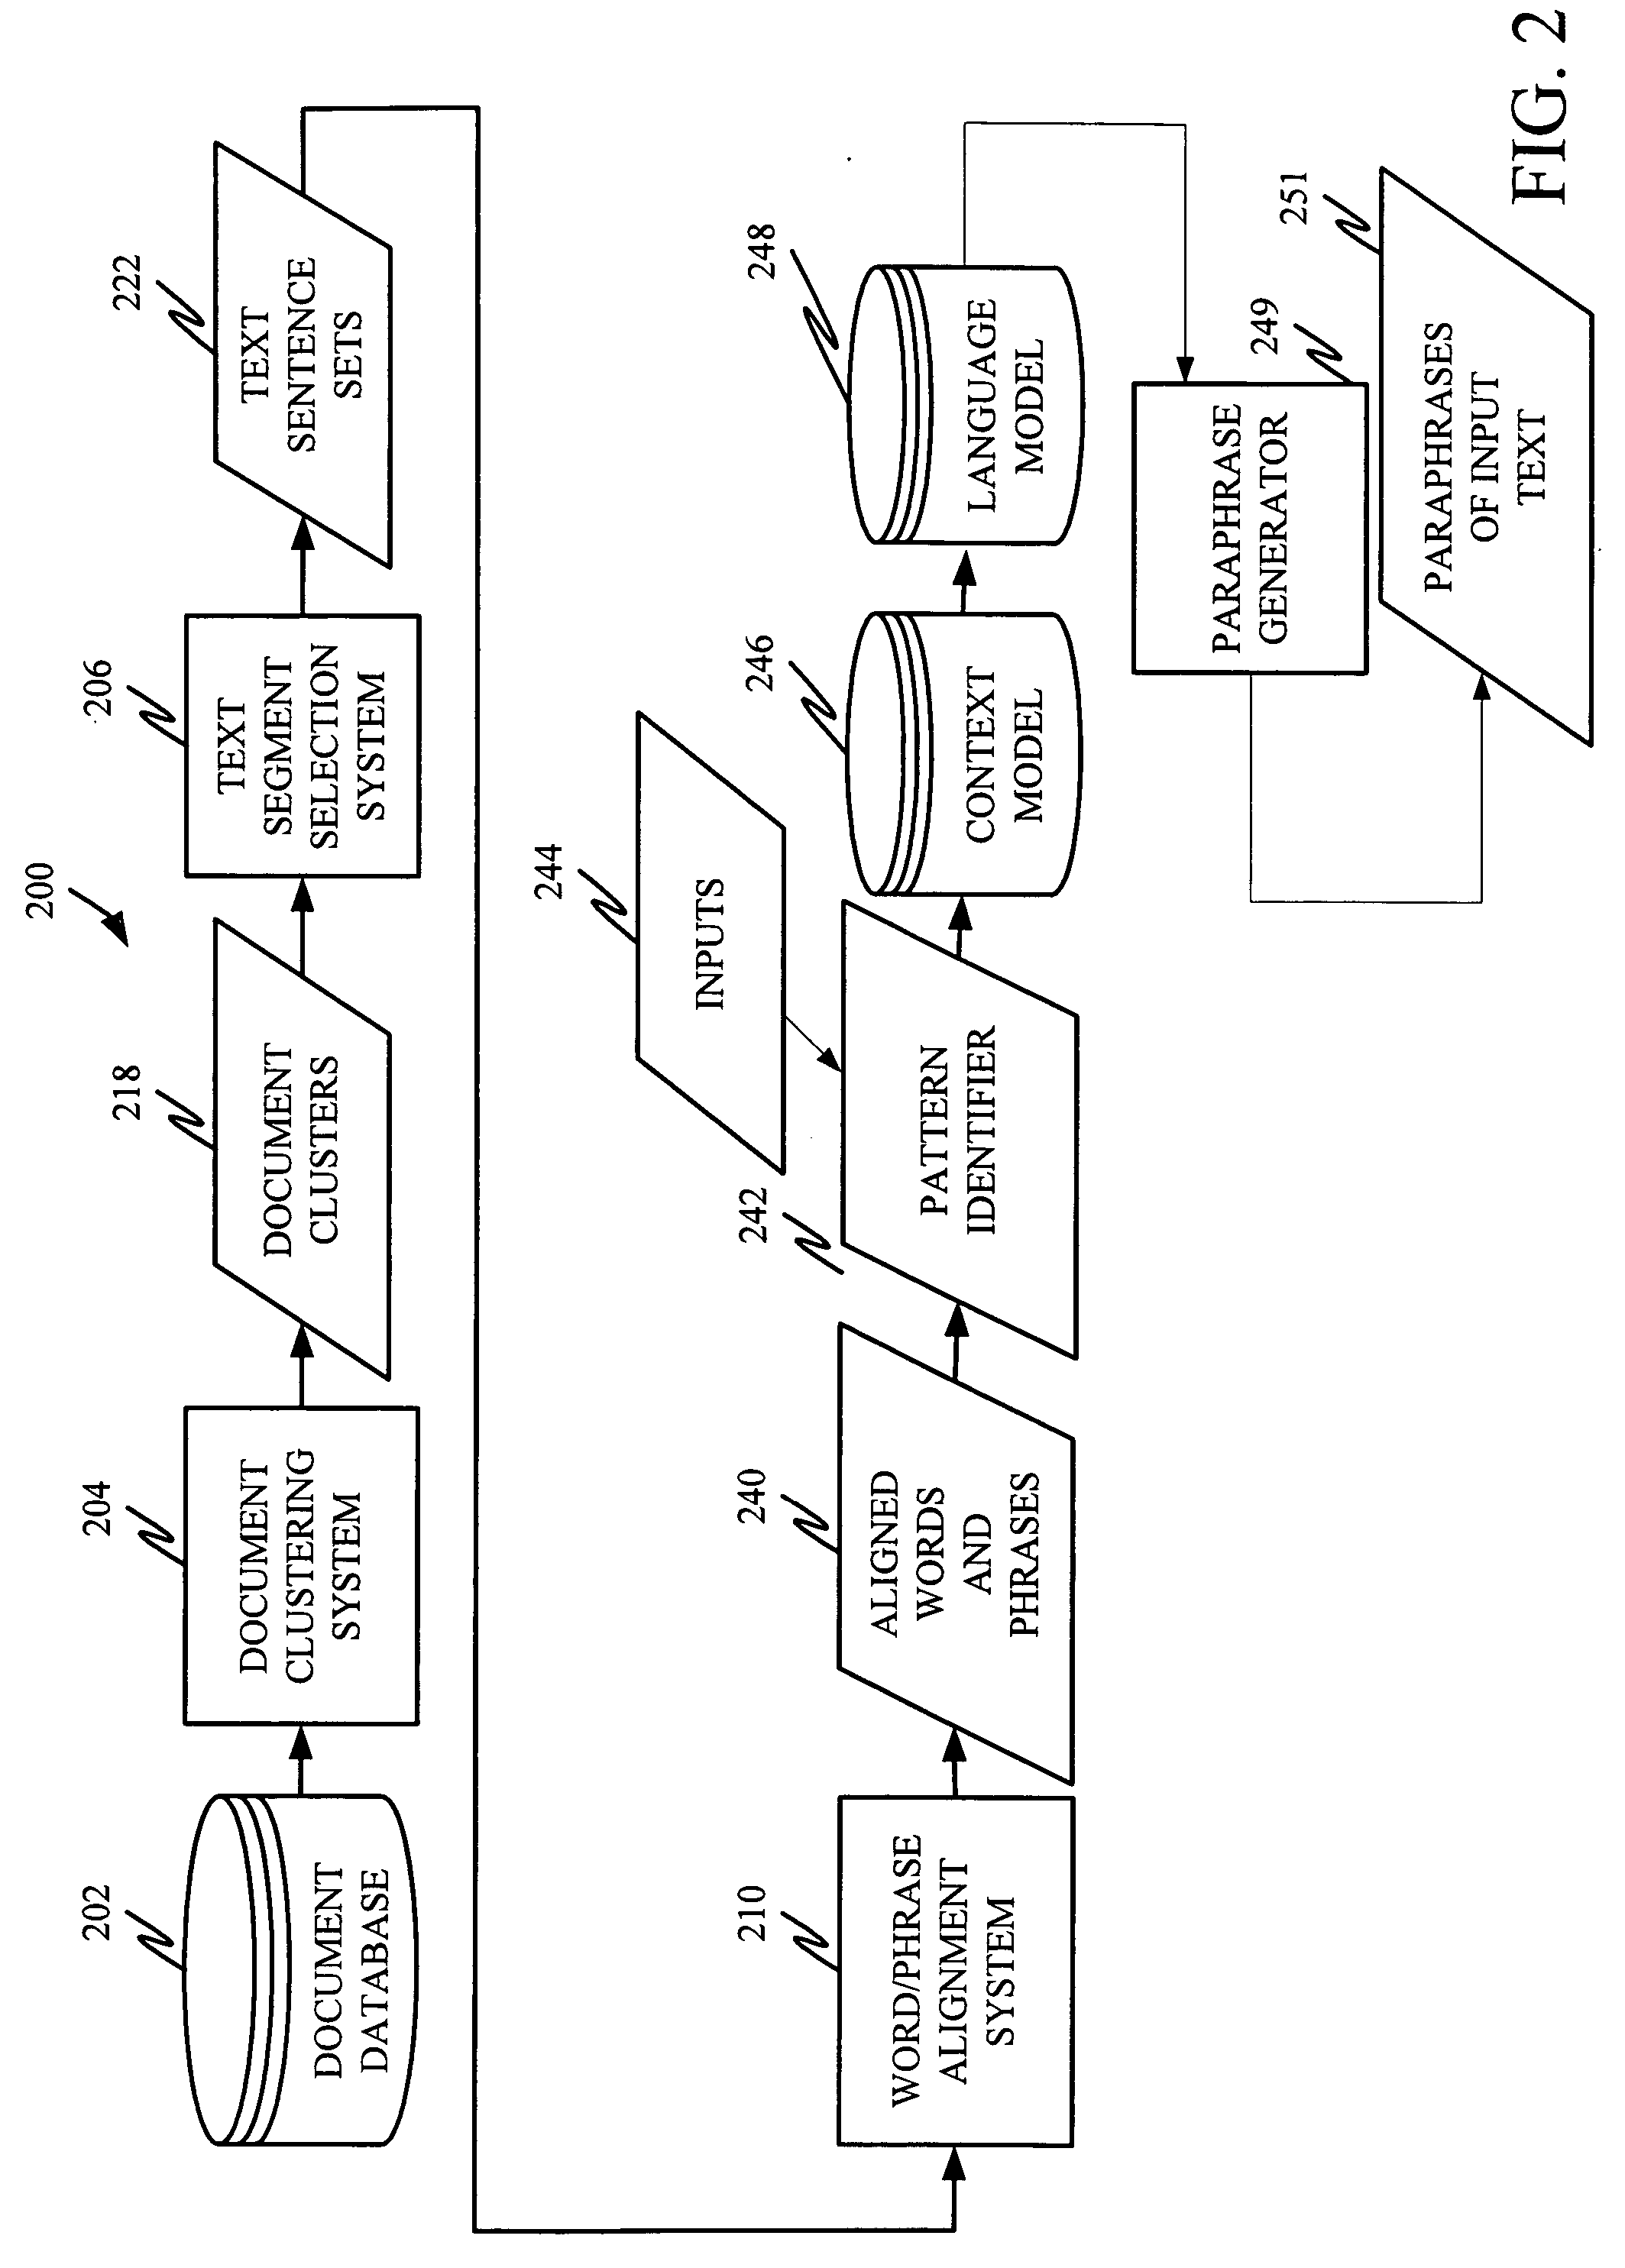 Unsupervised learning of paraphrase/ translation alternations and selective application thereof